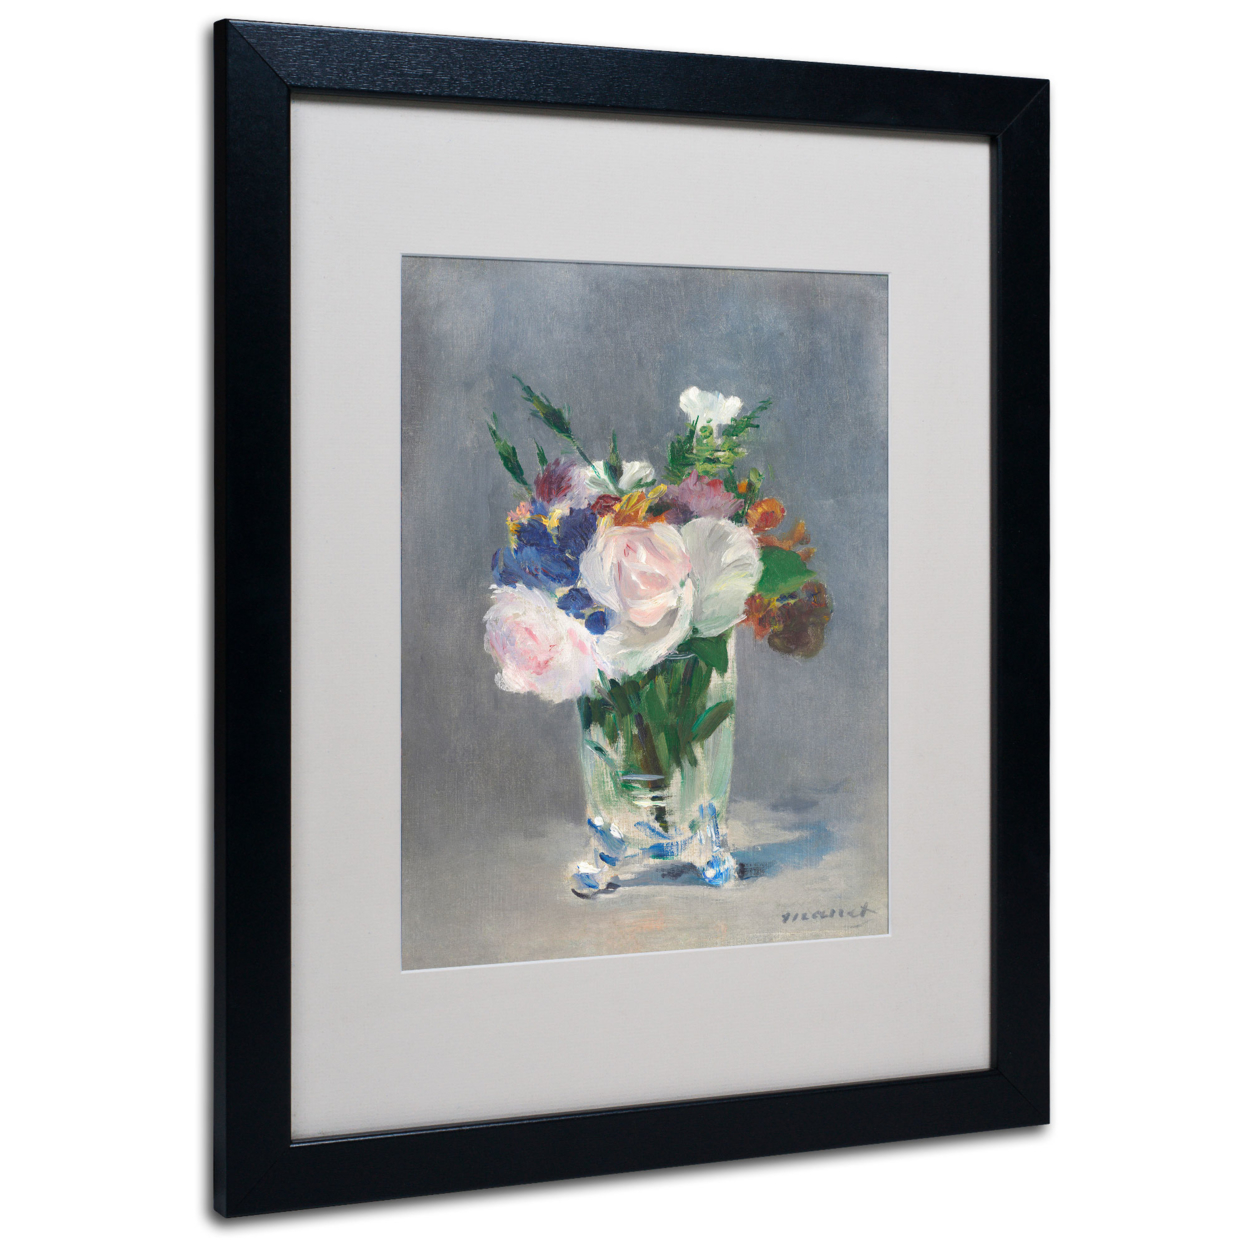 Edouard Manet 'Flowers In A Crystal Vase' Black Wooden Framed Art 18 X 22 Inches